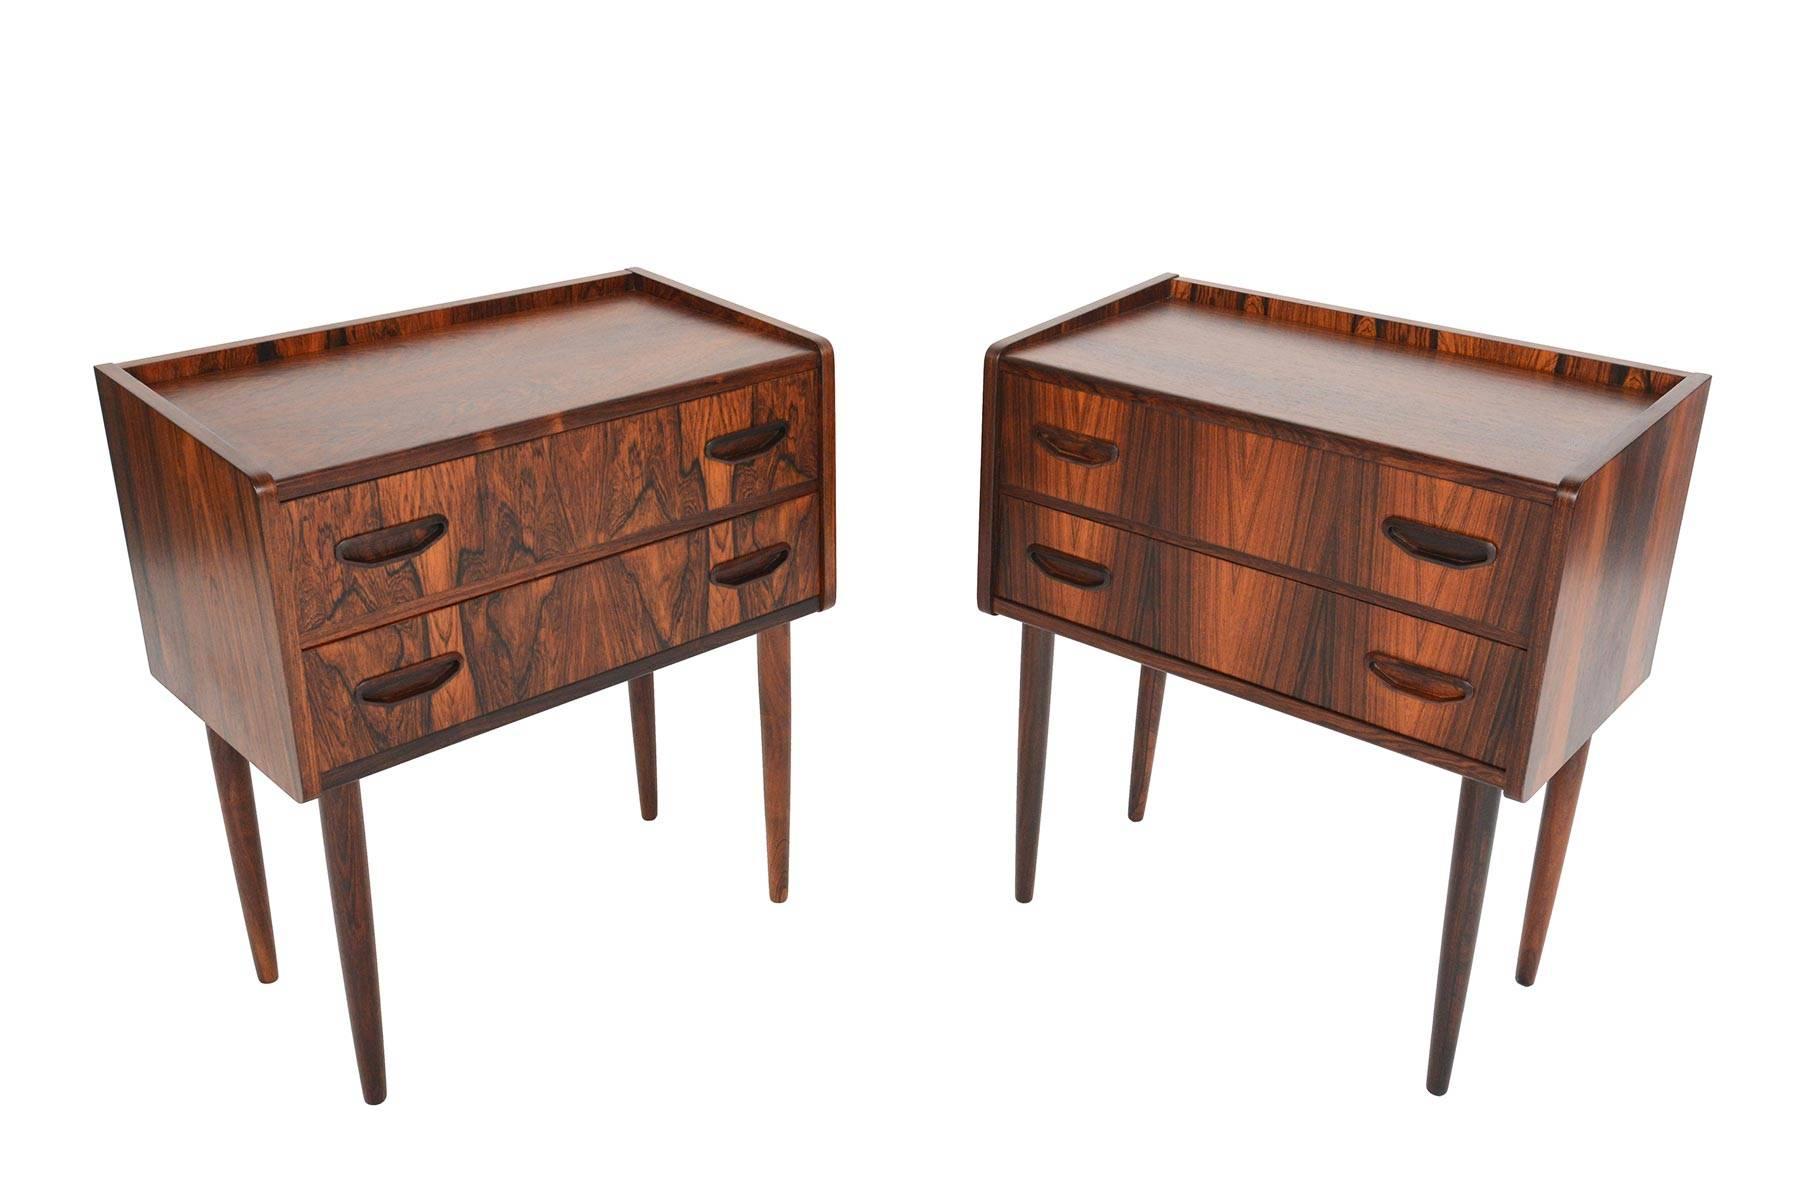 This pair of rare Danish modern midcentury two-drawer nightstands will make a statement in any modern home. Constructed from Brazilian rosewood with unique and distinctive grain, this pair features beautiful craftsmanship throughout. The drawers are